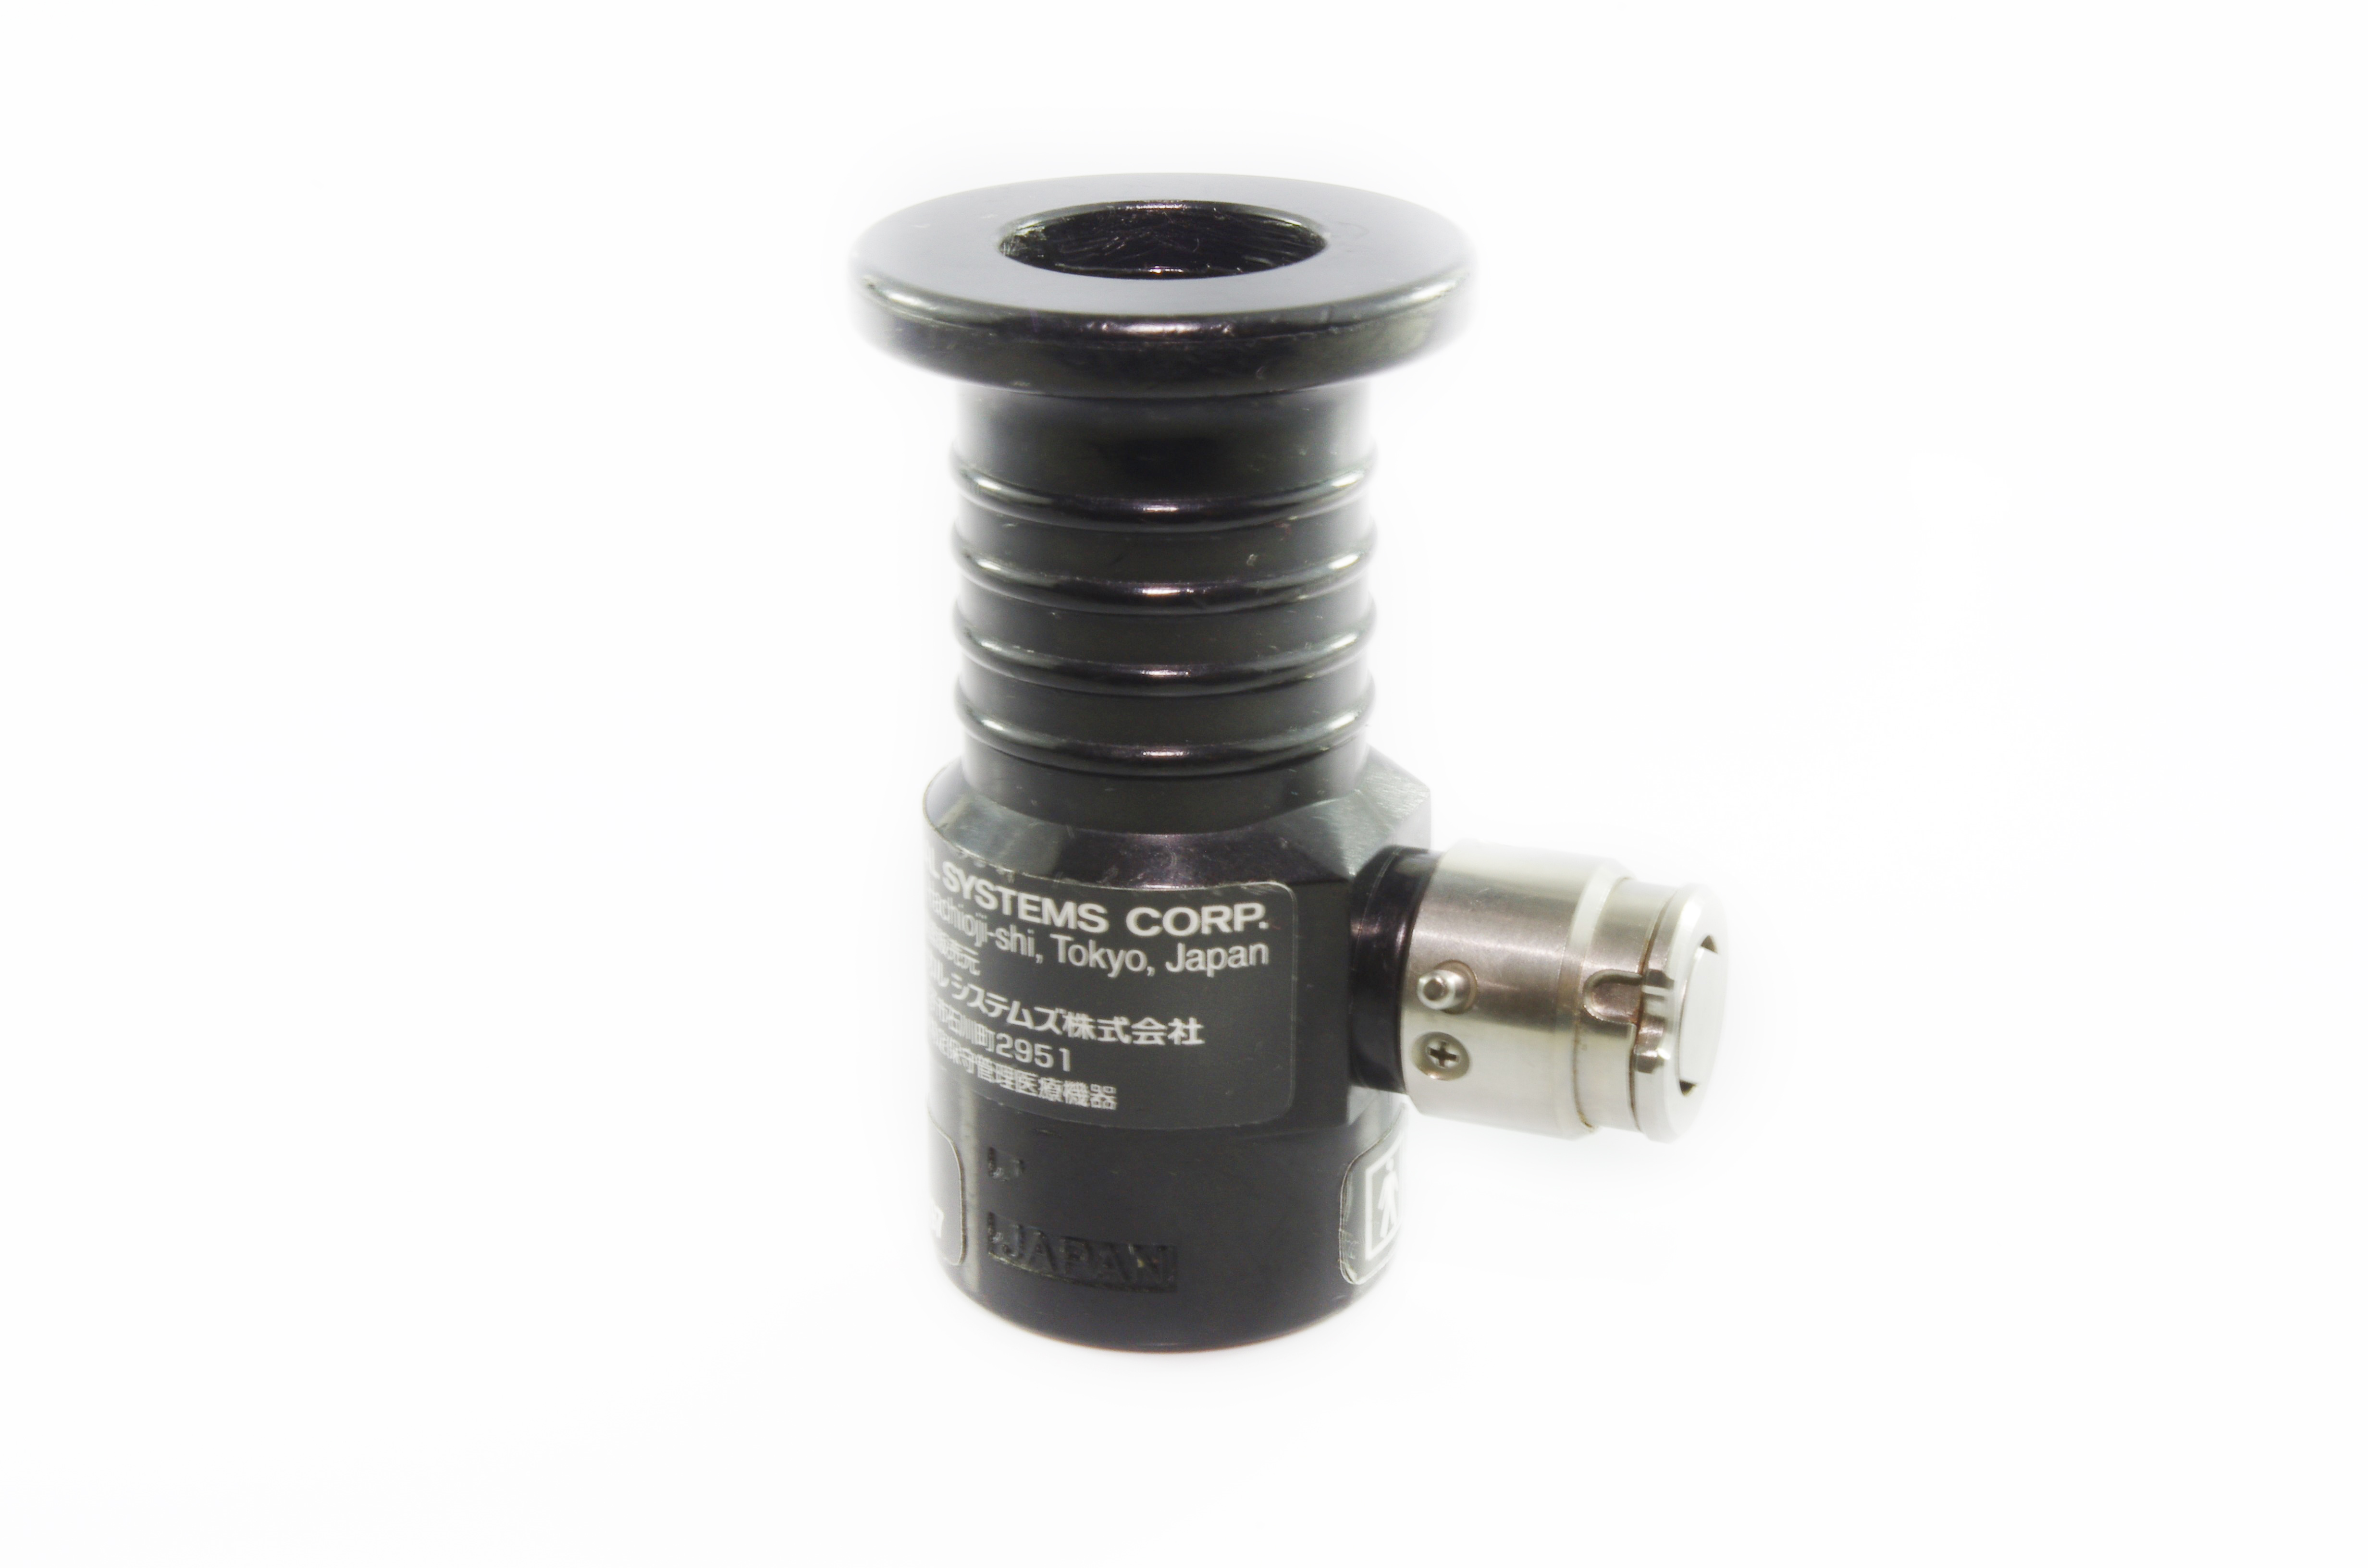 OEM ETO Connector Housing - CYF-4, URF-P3, ENF-P3, ENF-P4, LF-2 (Style 2 - Ridges Out) (ETO Valve Attached)